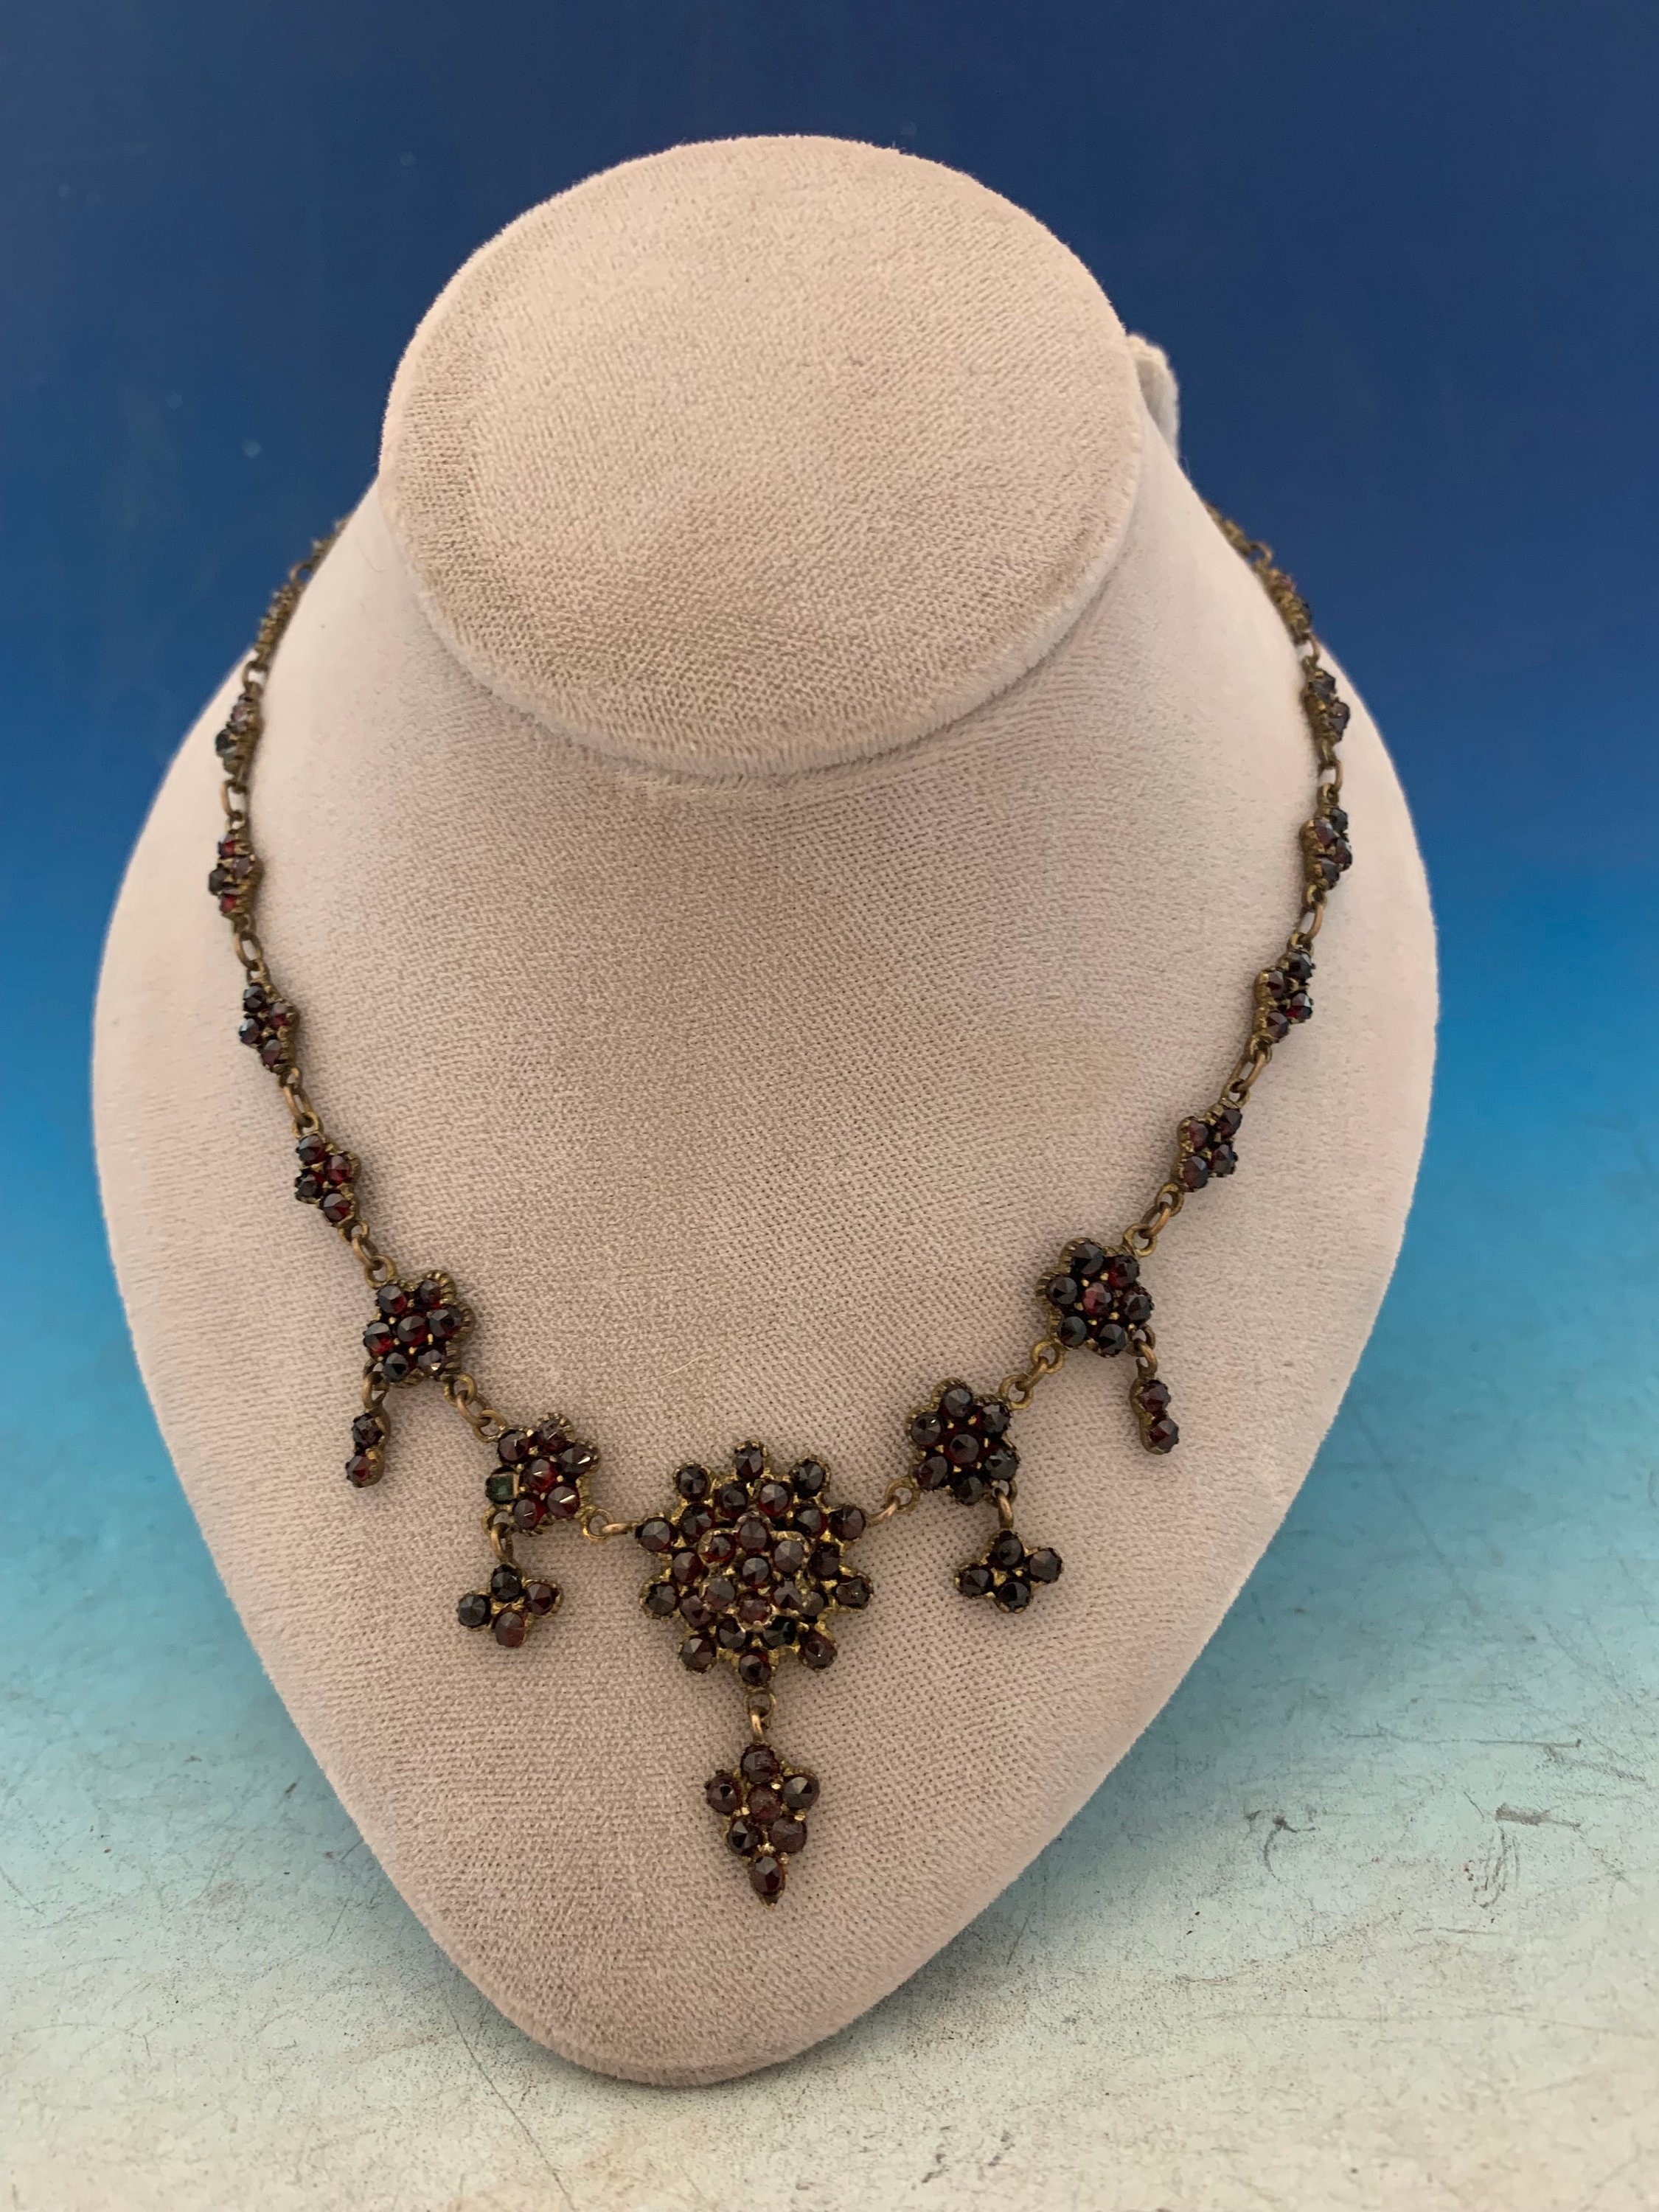 Antique Bohemian Garnet Necklace Rose Cut Stones From Czechoslovakia 1900  Am Double Gold Plated - Etsy